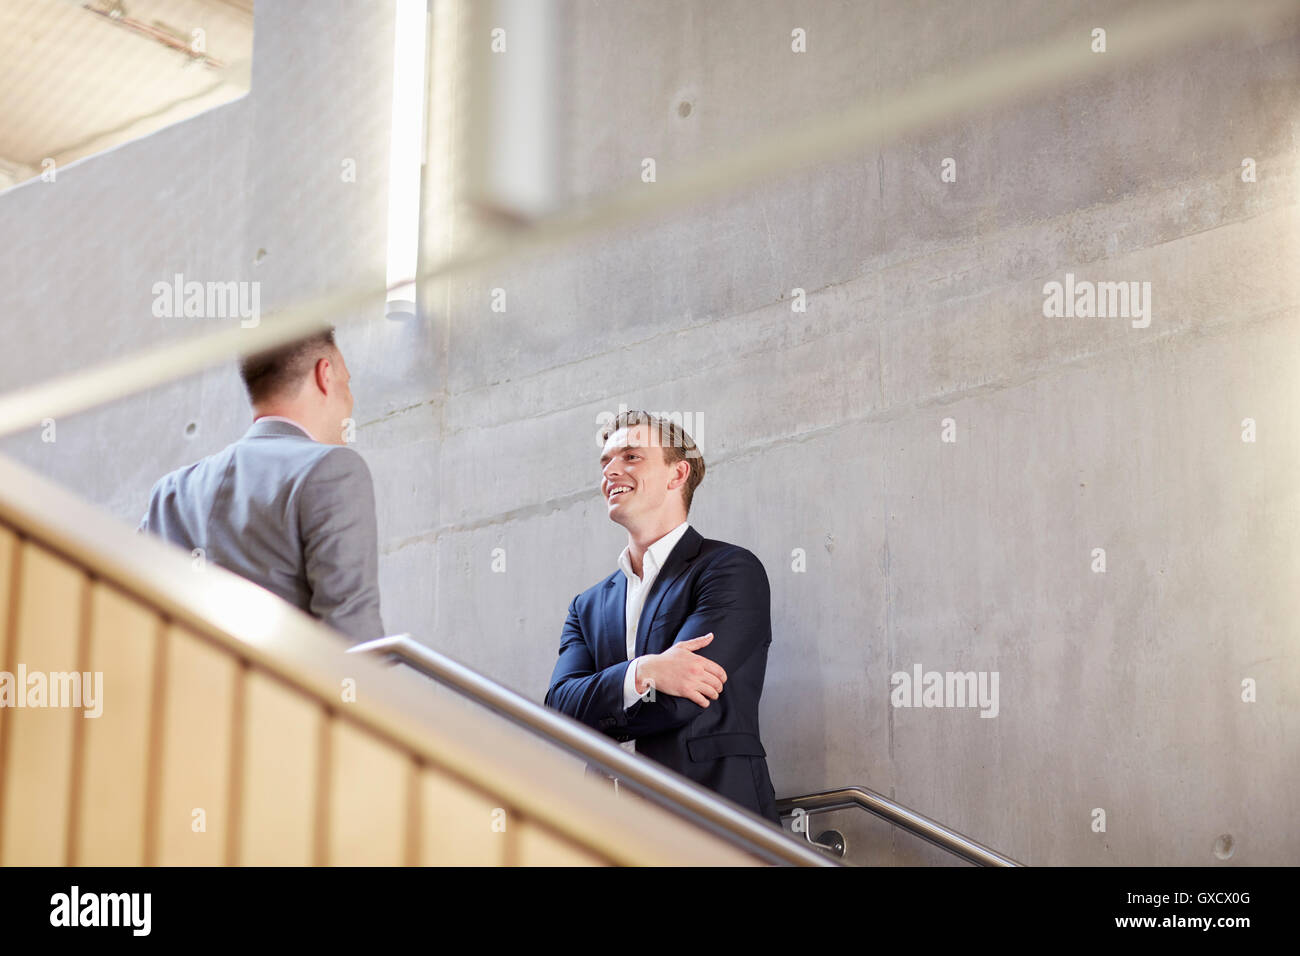 Deux businessmen talking on office stairway Banque D'Images